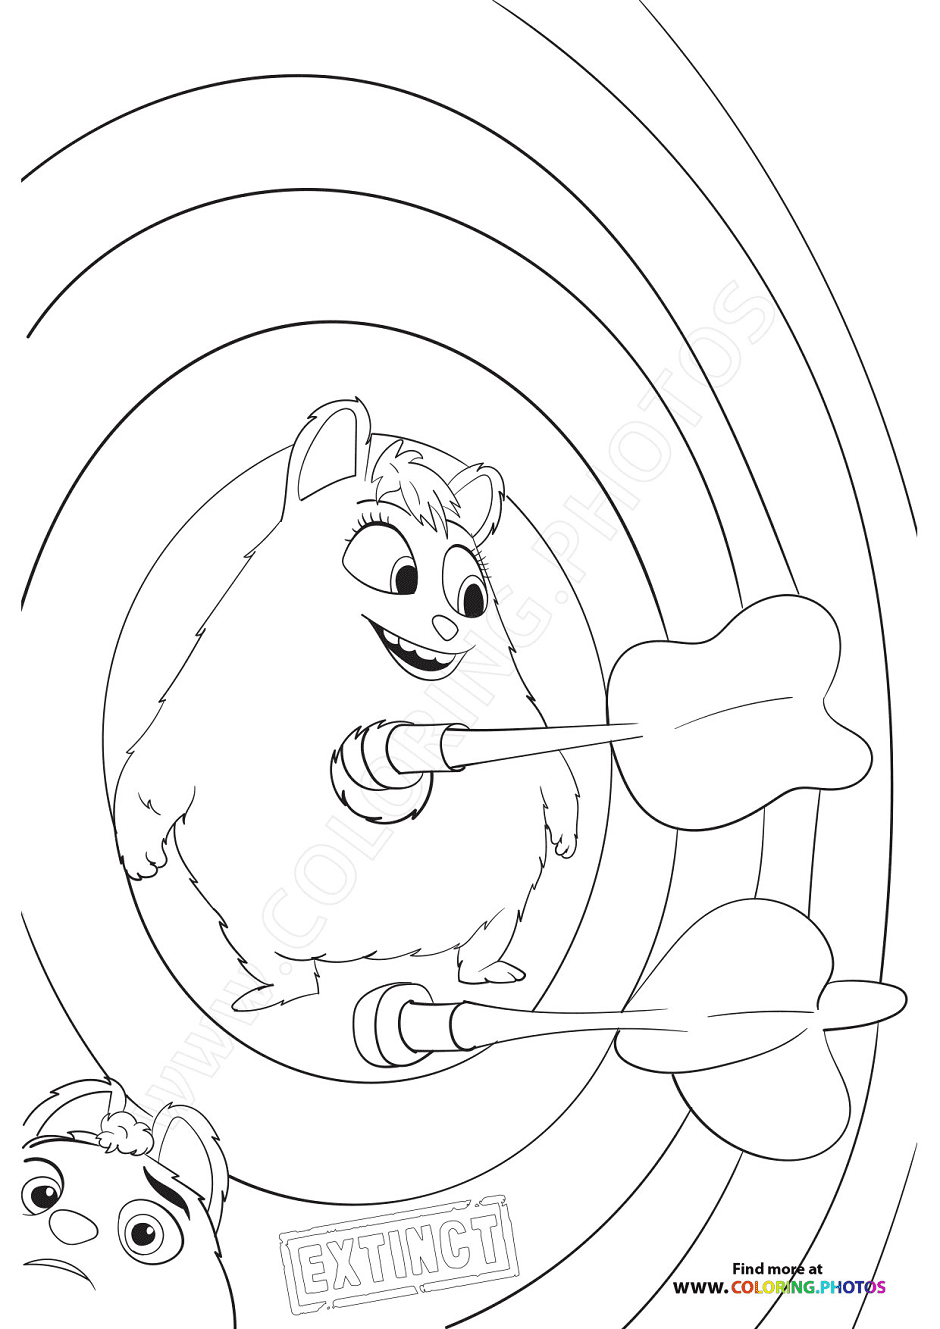 Ed With Op Coloring Pages